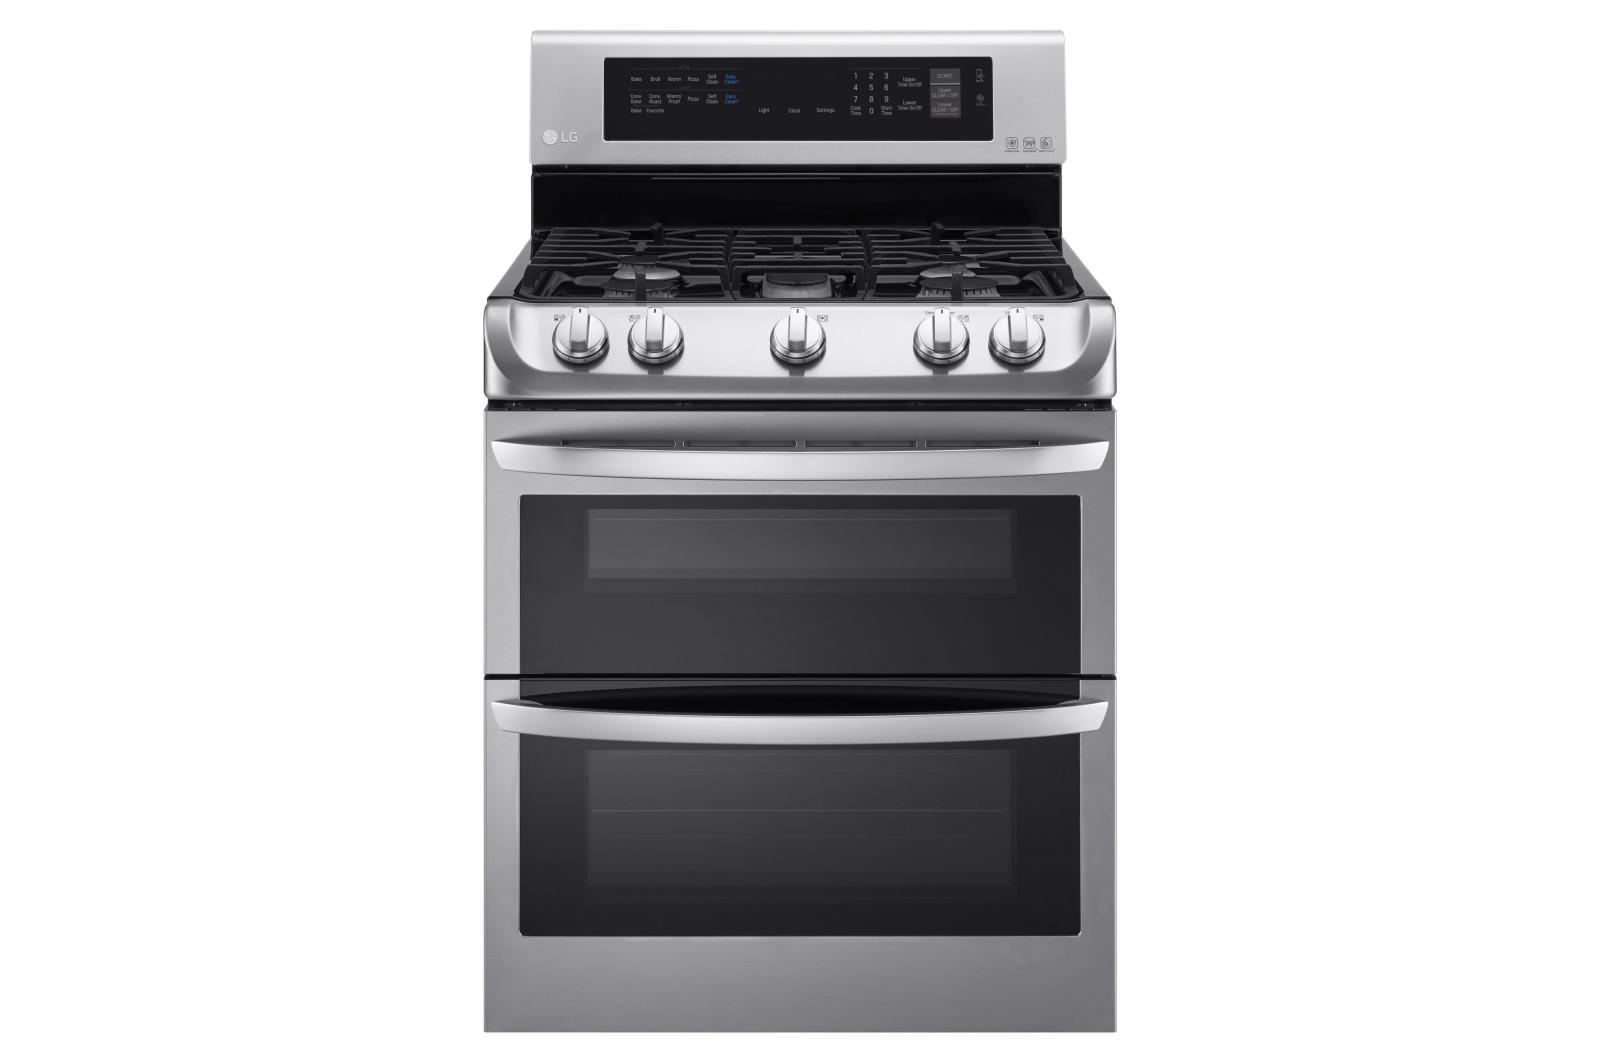 Lg 6.9 cu. ft. Gas Double Oven Range with ProBake Convection® and EasyClean®